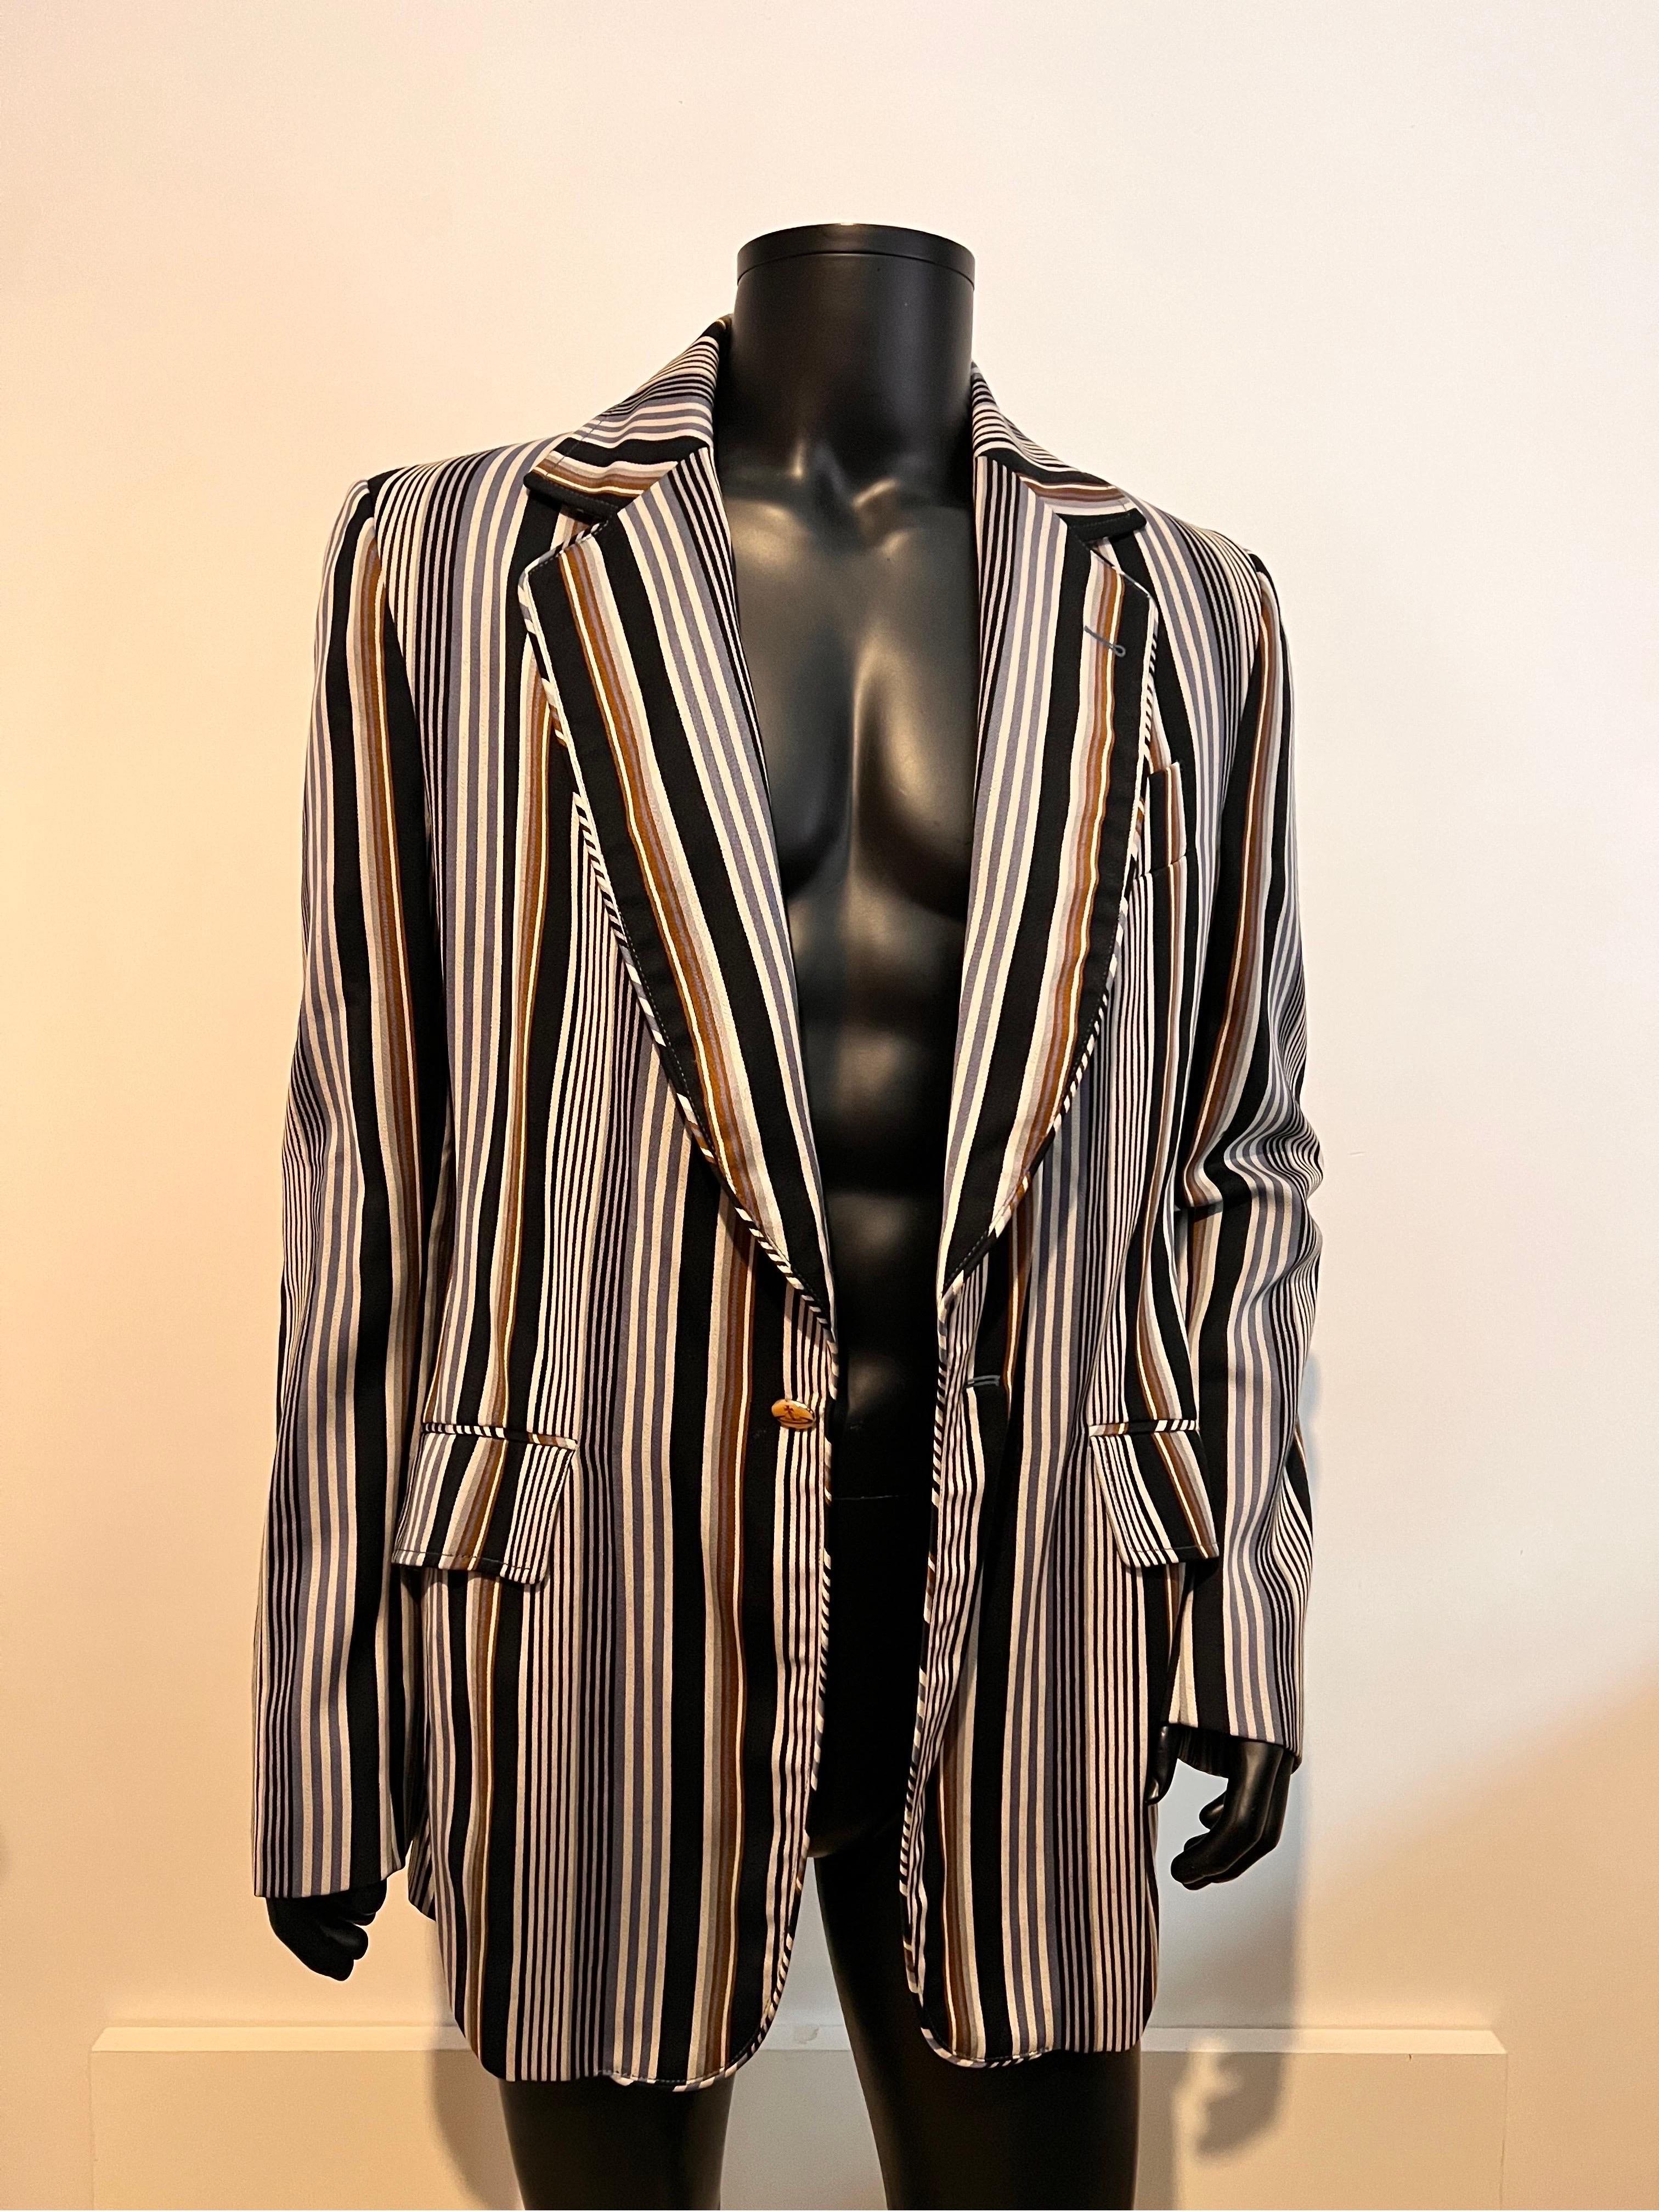 Vintage 1990’s Vivienne Westwood MAN multi stripe jacket with cuff link buttons  For Sale 1